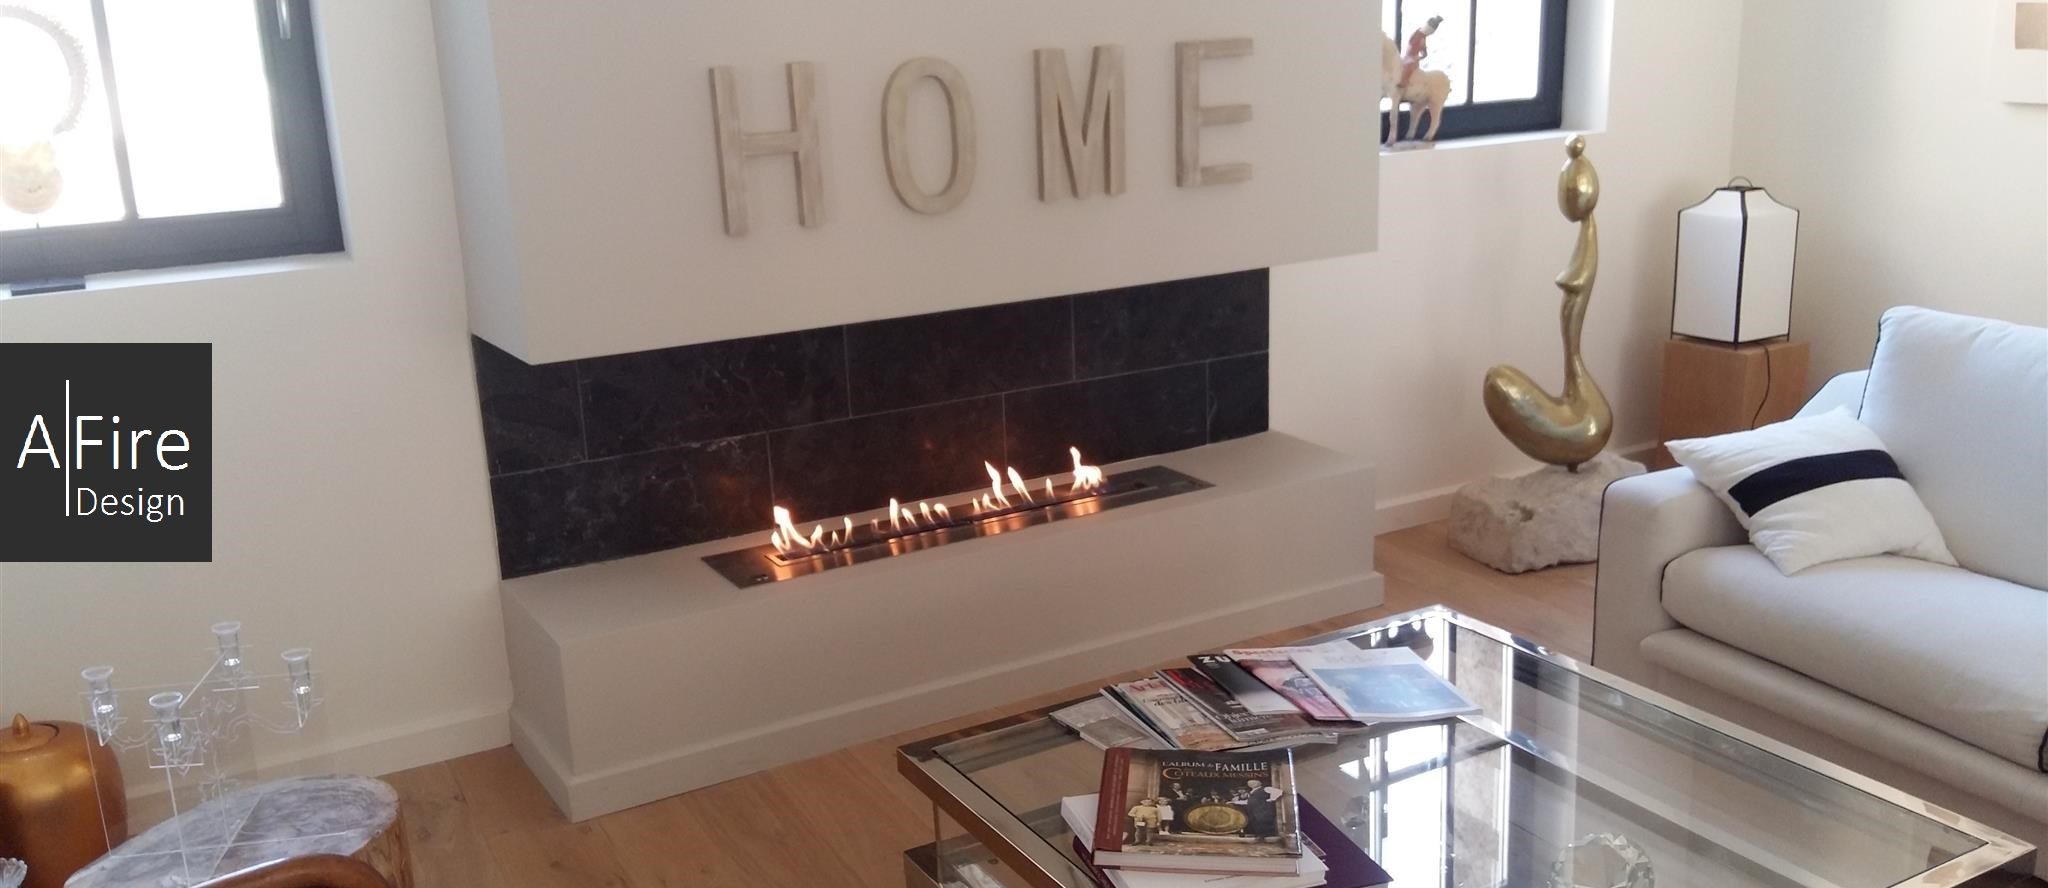 Ethanol Fireplaces for Apartments and Townhouses